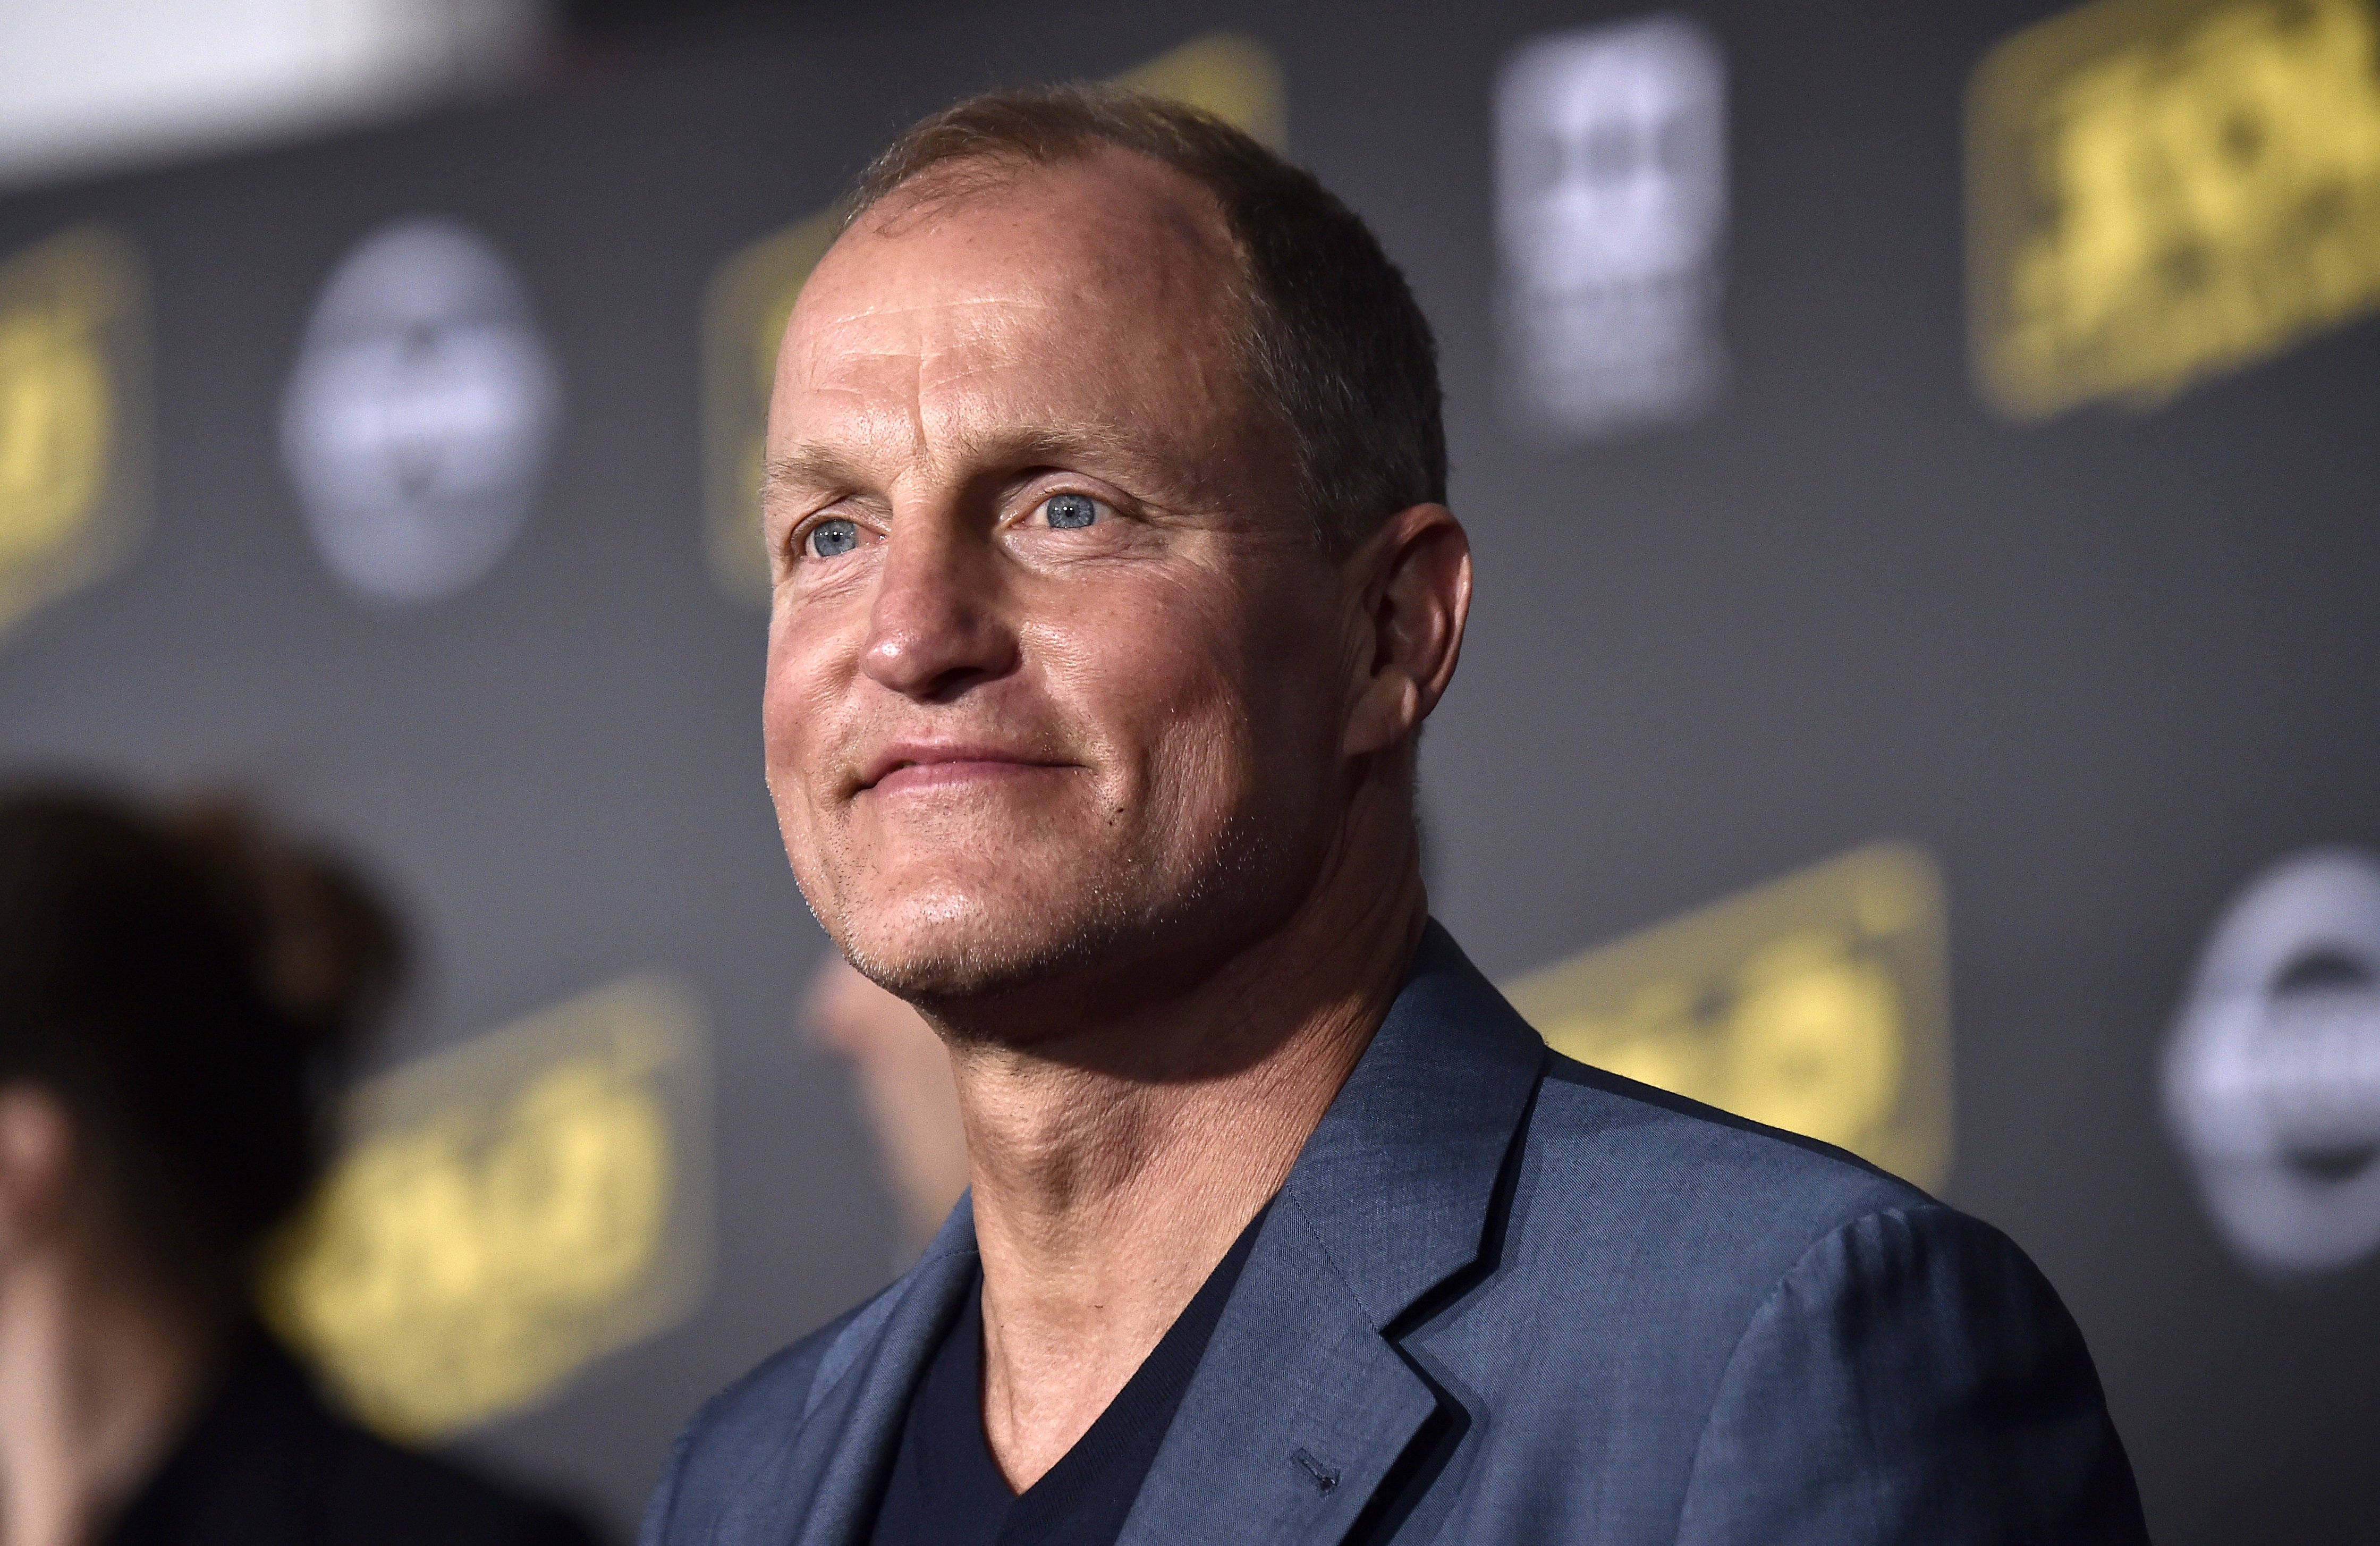 Woody Harrelson attends the Premiere Of Disney Pictures And Lucasfilm's "Solo: A Star Wars Story" - Arrivals on May 10, 2018, in Los Angeles, California. | Source: Getty Images.